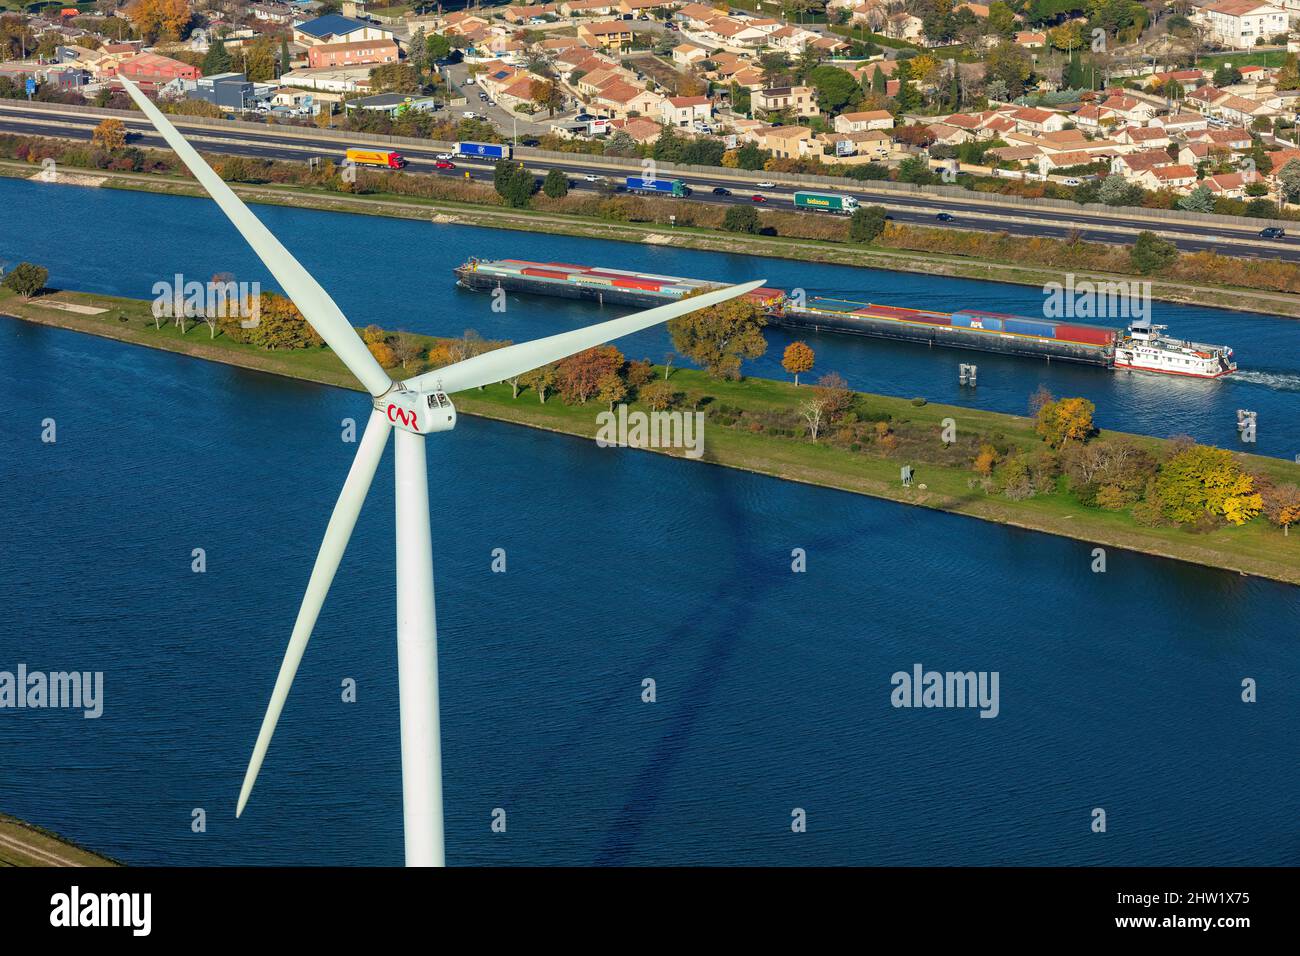 France, Vaucluse, Bollene, wind turbine, barge on Le Rhone, container transport, A7 Sun highway, wind farm (aerial view) Stock Photo